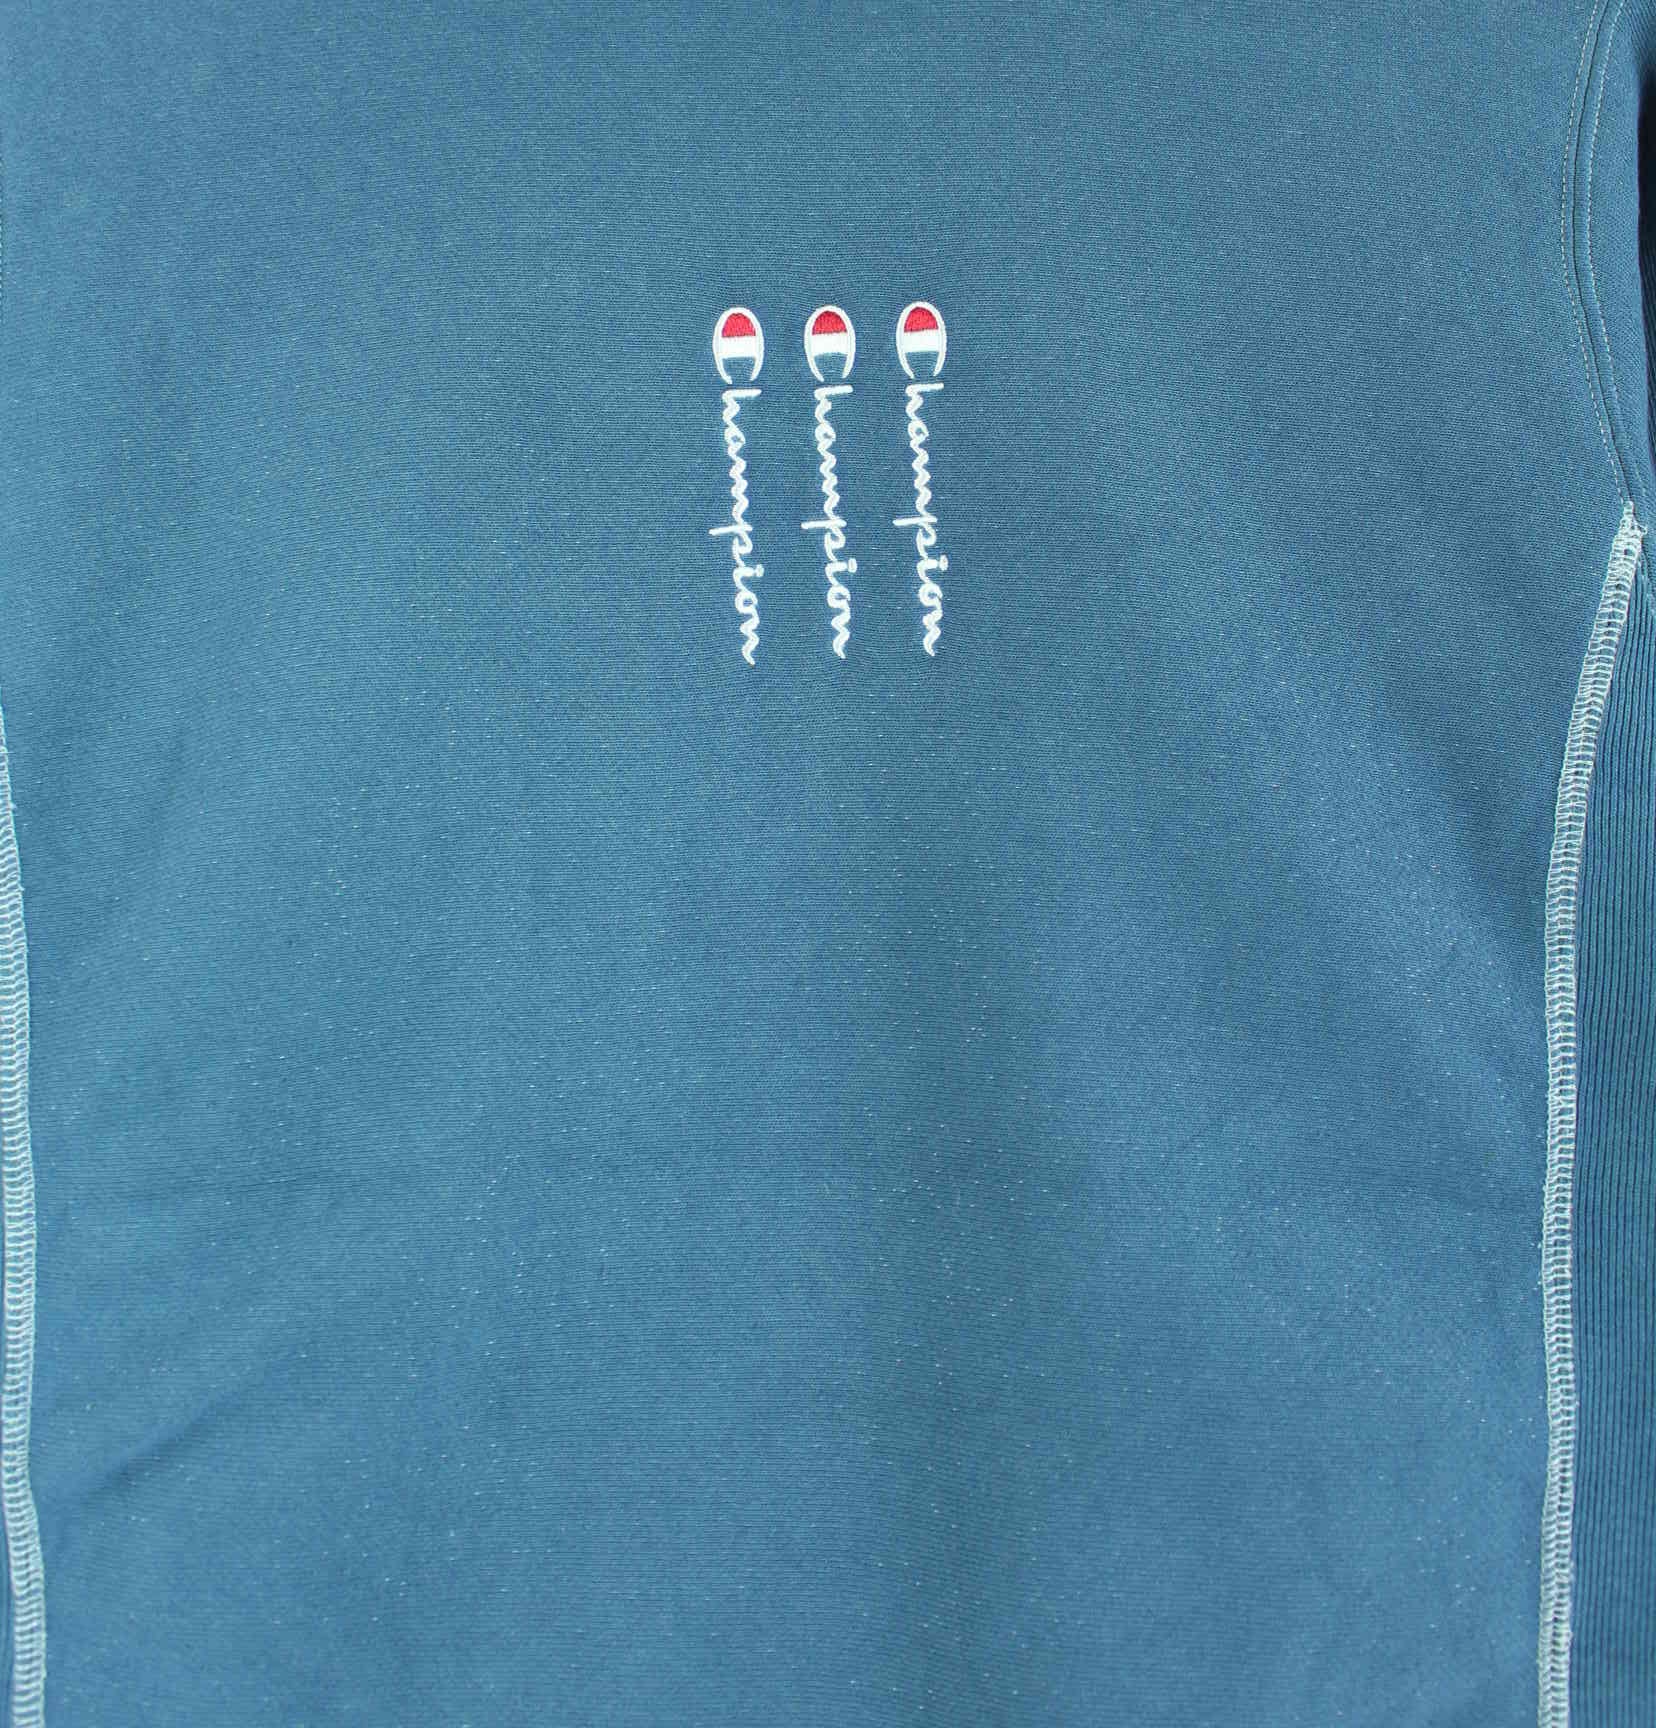 Champion Embroidered Reverse Weave Sweater Blau S (detail image 1)